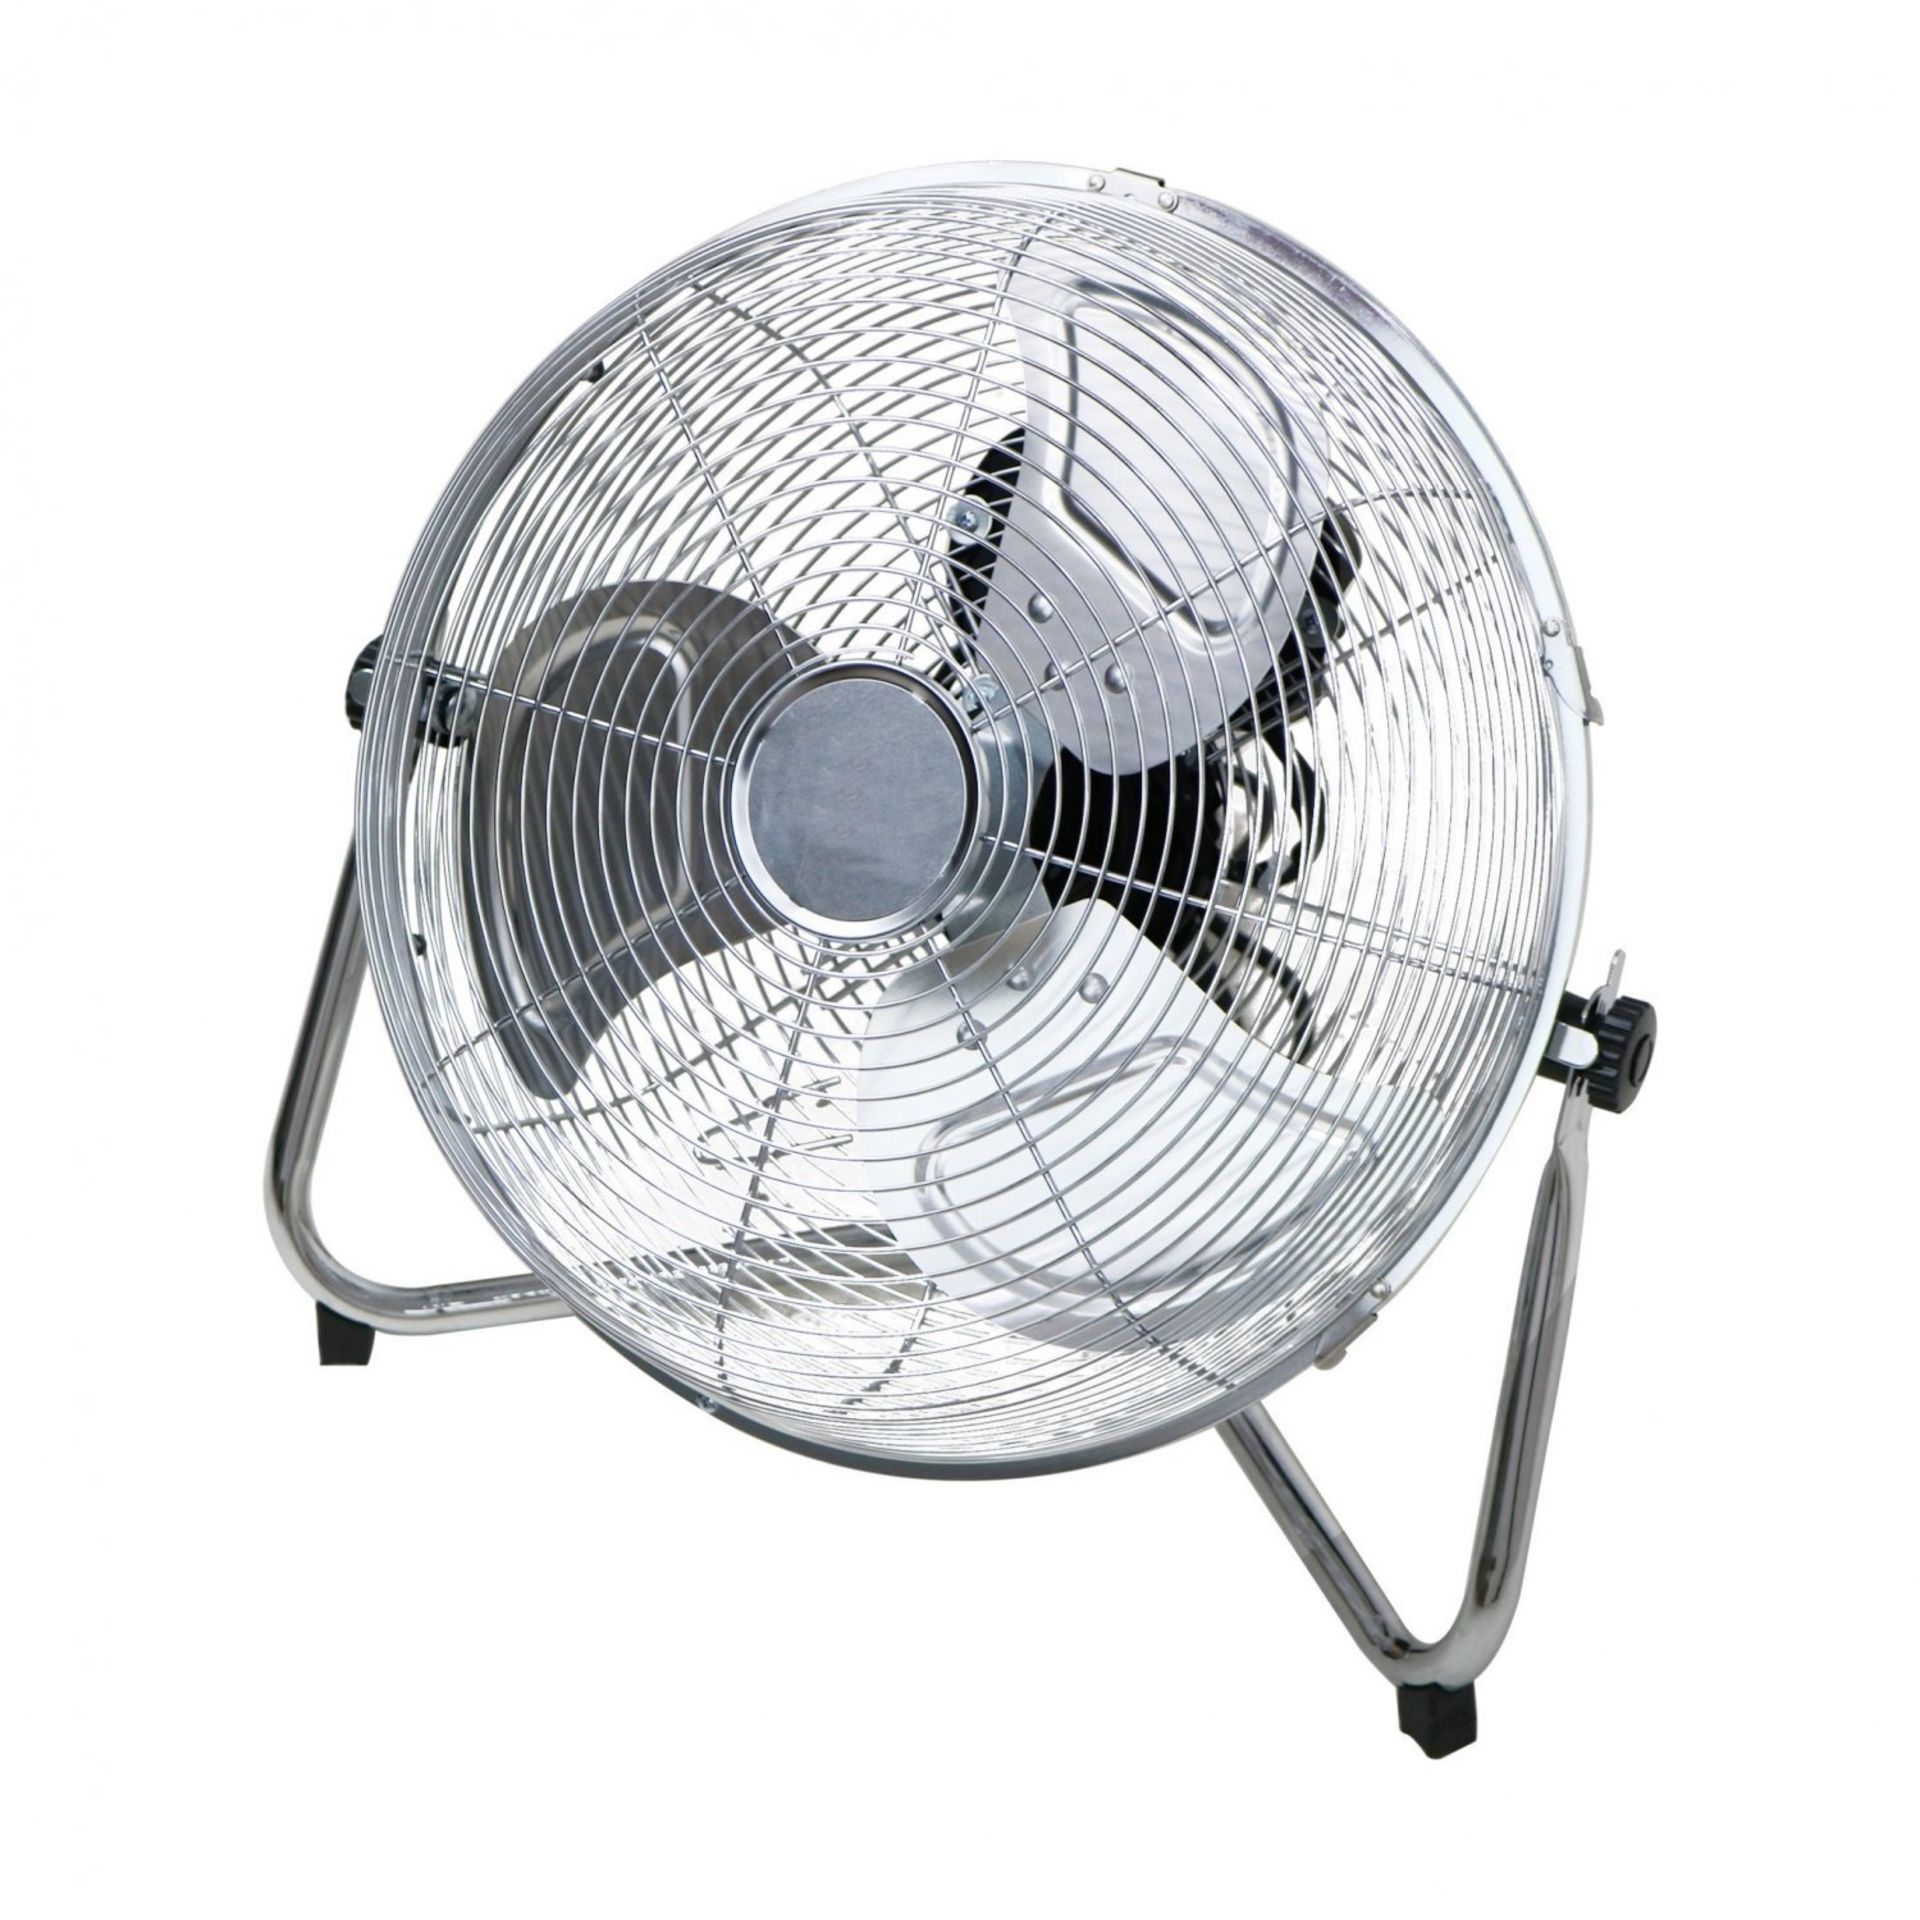 (RL124) 12" Inch Chrome 3 Speed Floor Standing Gym Fan Hydroponic Stay cool this year with t... - Bild 2 aus 2